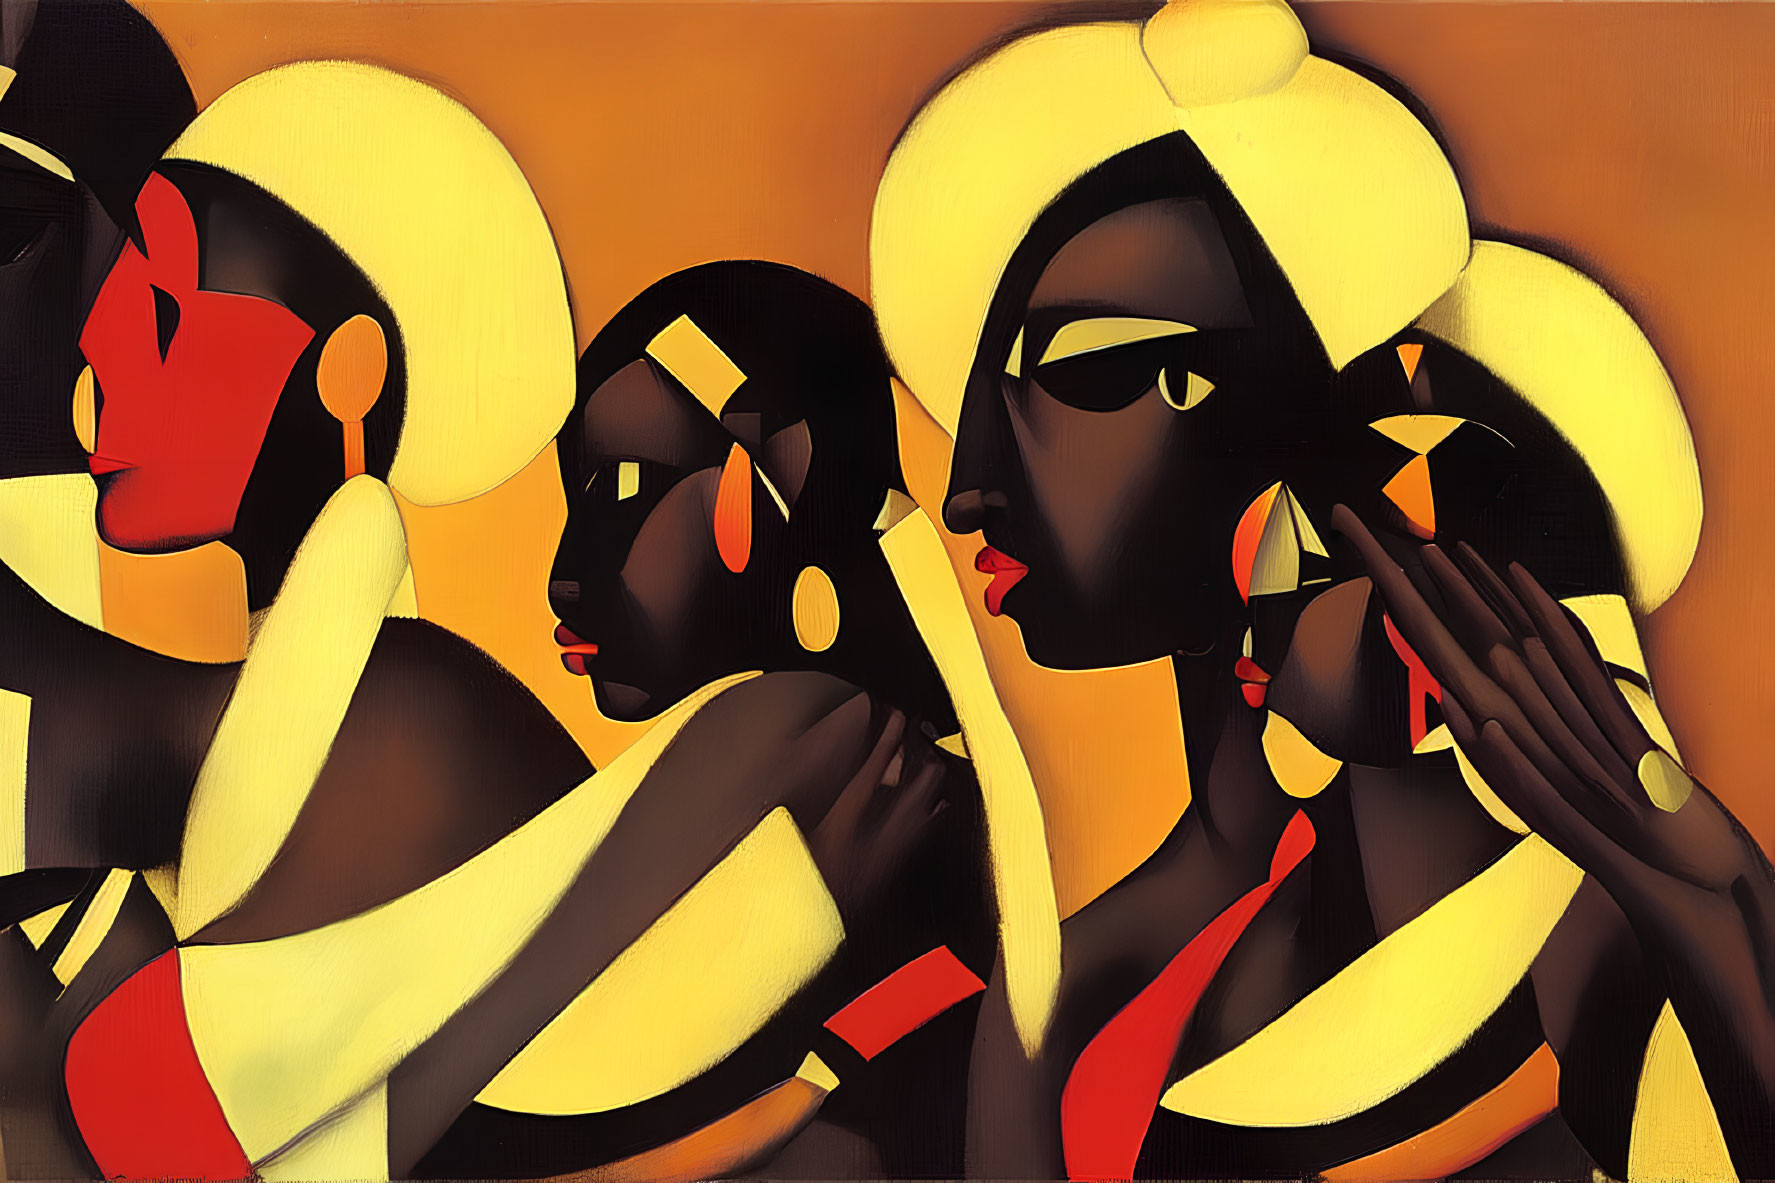 Artistic depiction of three women with exaggerated features in warm color palette